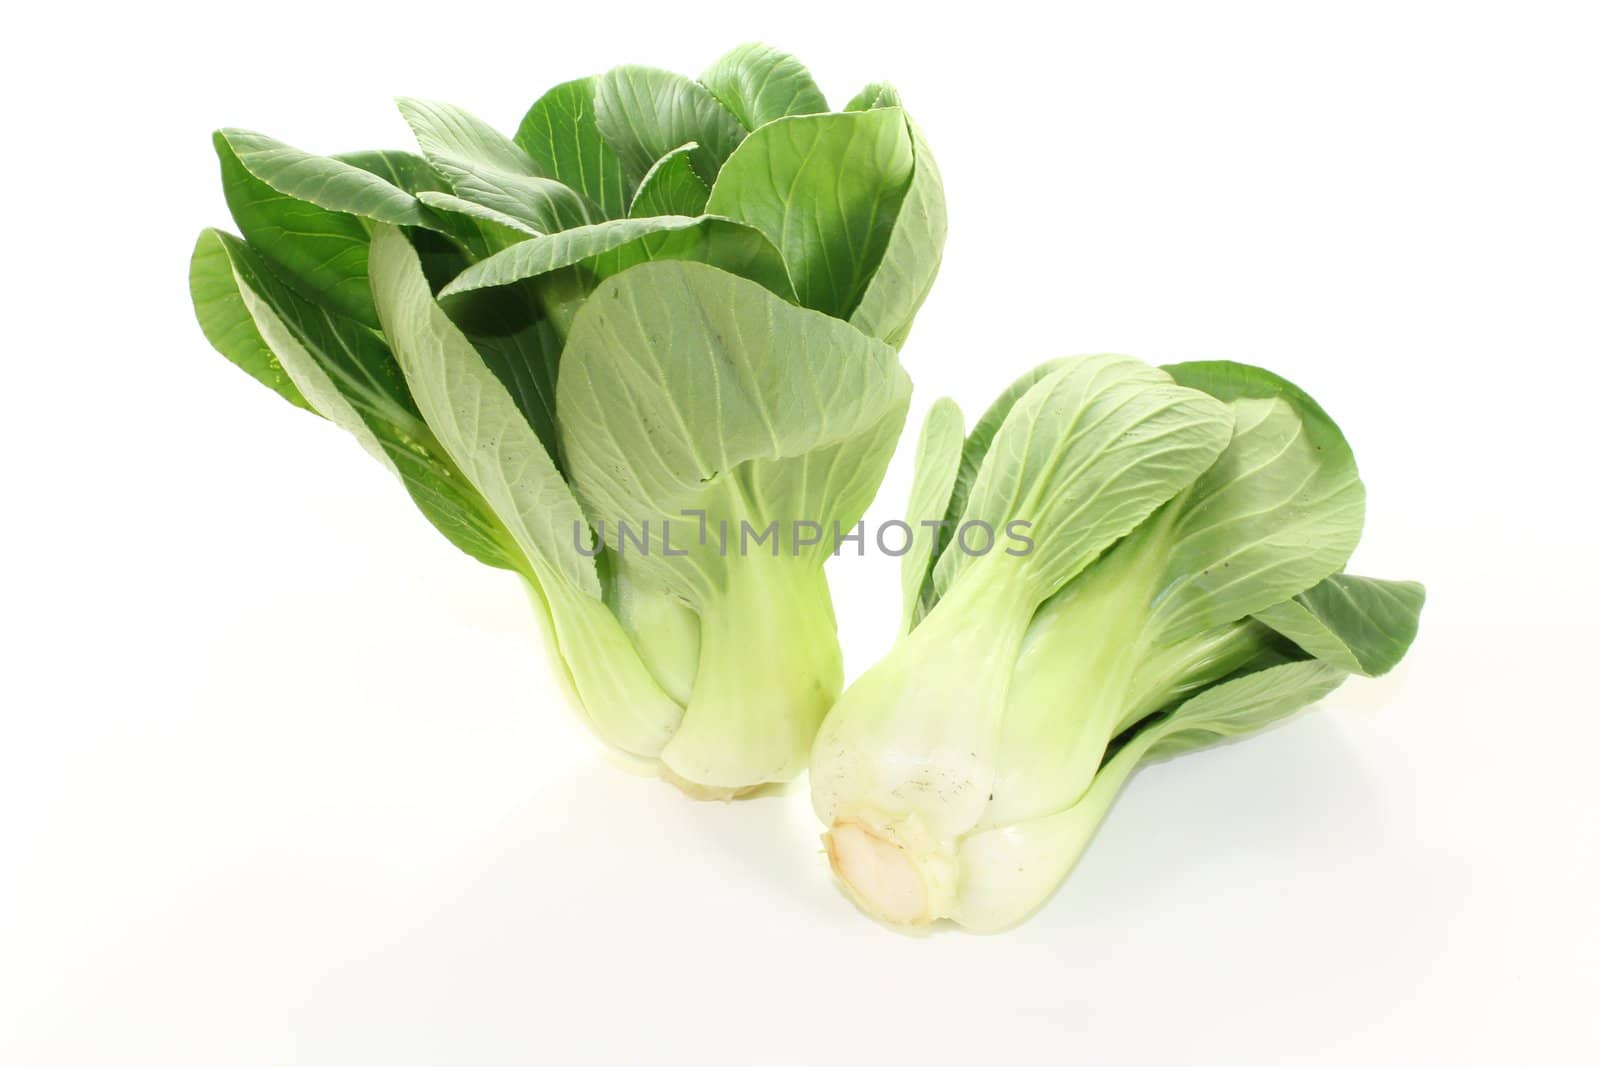 crunchy pak choi by discovery